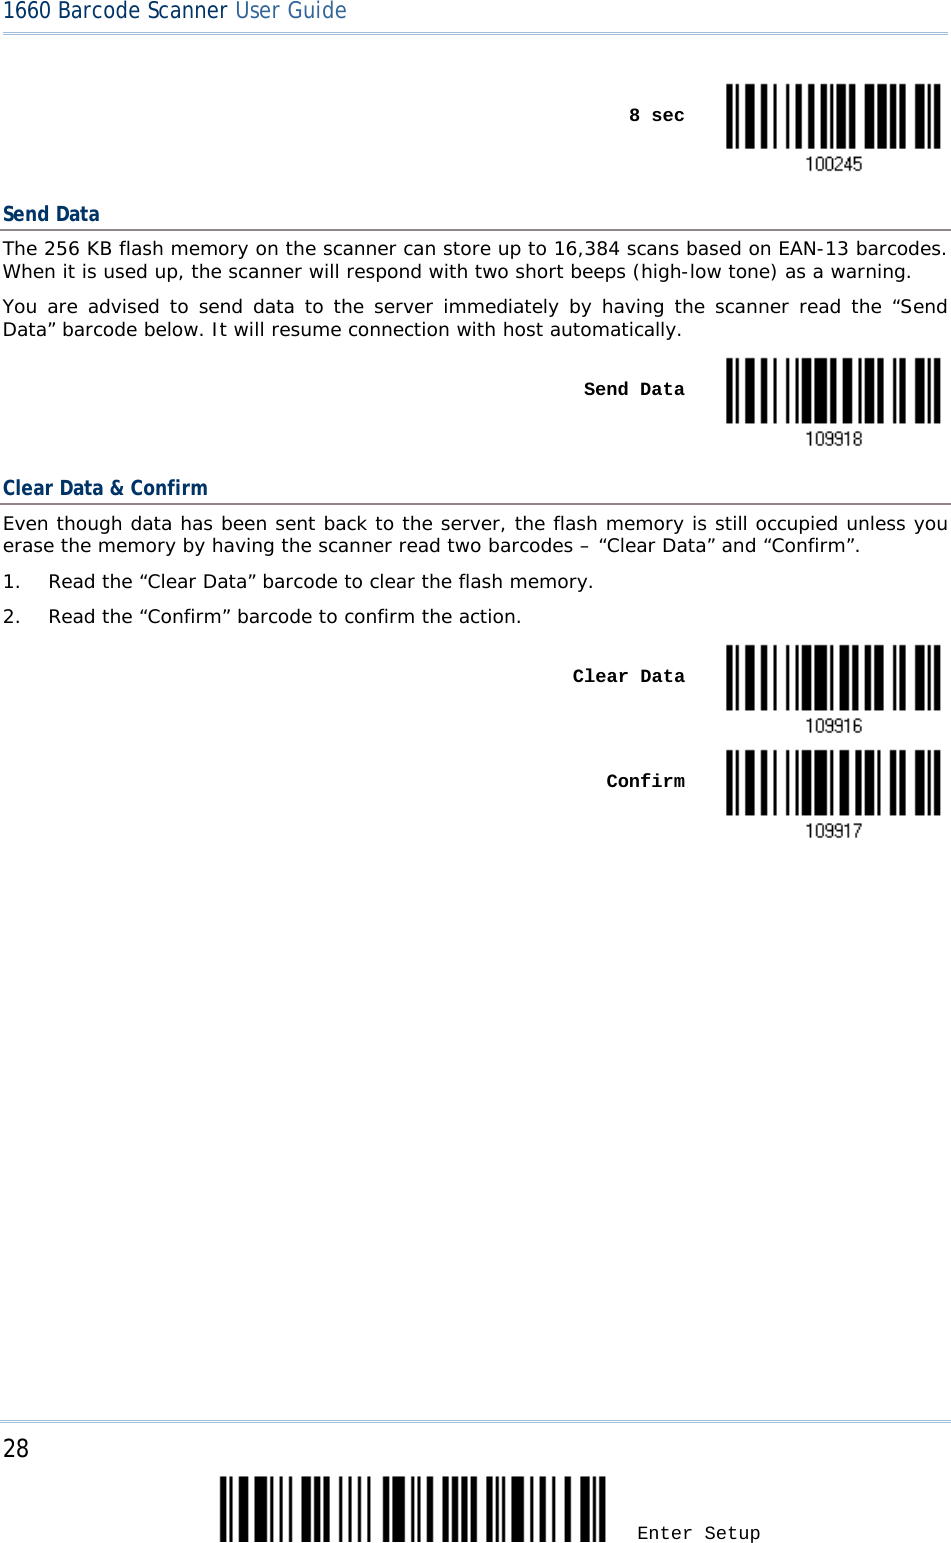 28 Enter Setup 1660 Barcode Scanner User Guide     8 sec  Send Data The 256 KB flash memory on the scanner can store up to 16,384 scans based on EAN-13 barcodes. When it is used up, the scanner will respond with two short beeps (high-low tone) as a warning. You are advised to send data to the server immediately by having the scanner read the “Send Data” barcode below. It will resume connection with host automatically.    Send Data  Clear Data &amp; Confirm Even though data has been sent back to the server, the flash memory is still occupied unless you erase the memory by having the scanner read two barcodes – “Clear Data” and “Confirm”. 1. Read the “Clear Data” barcode to clear the flash memory. 2. Read the “Confirm” barcode to confirm the action.      Clear Data     Confirm      